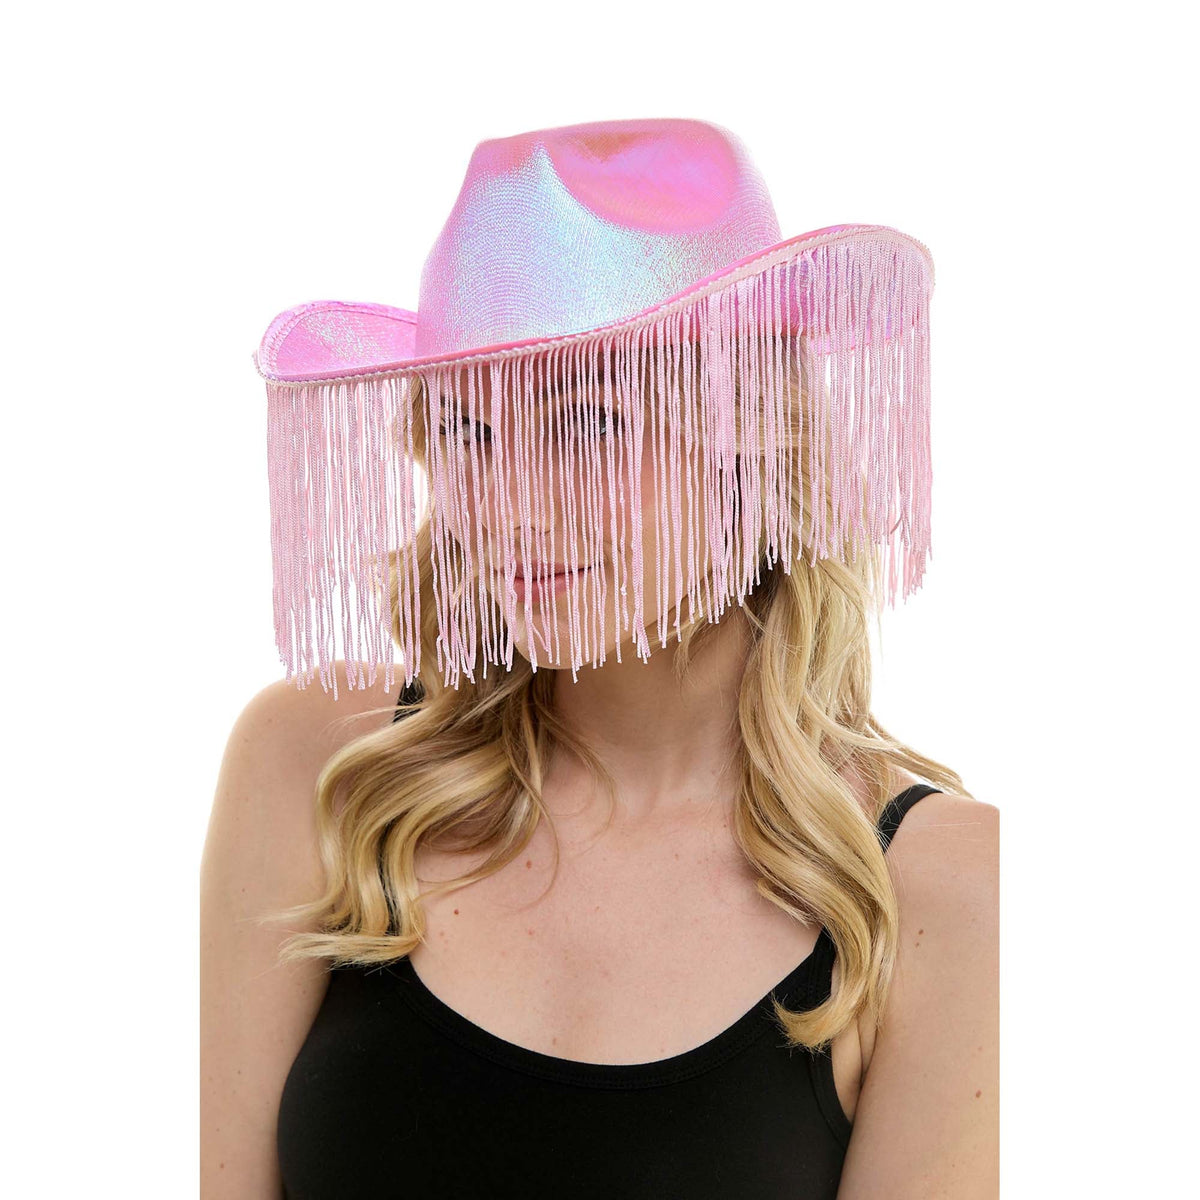 KBW GLOBAL CORP Costume Accessories Iridescent Pink Cowboy Hat with Fringe for Adults 831687065361